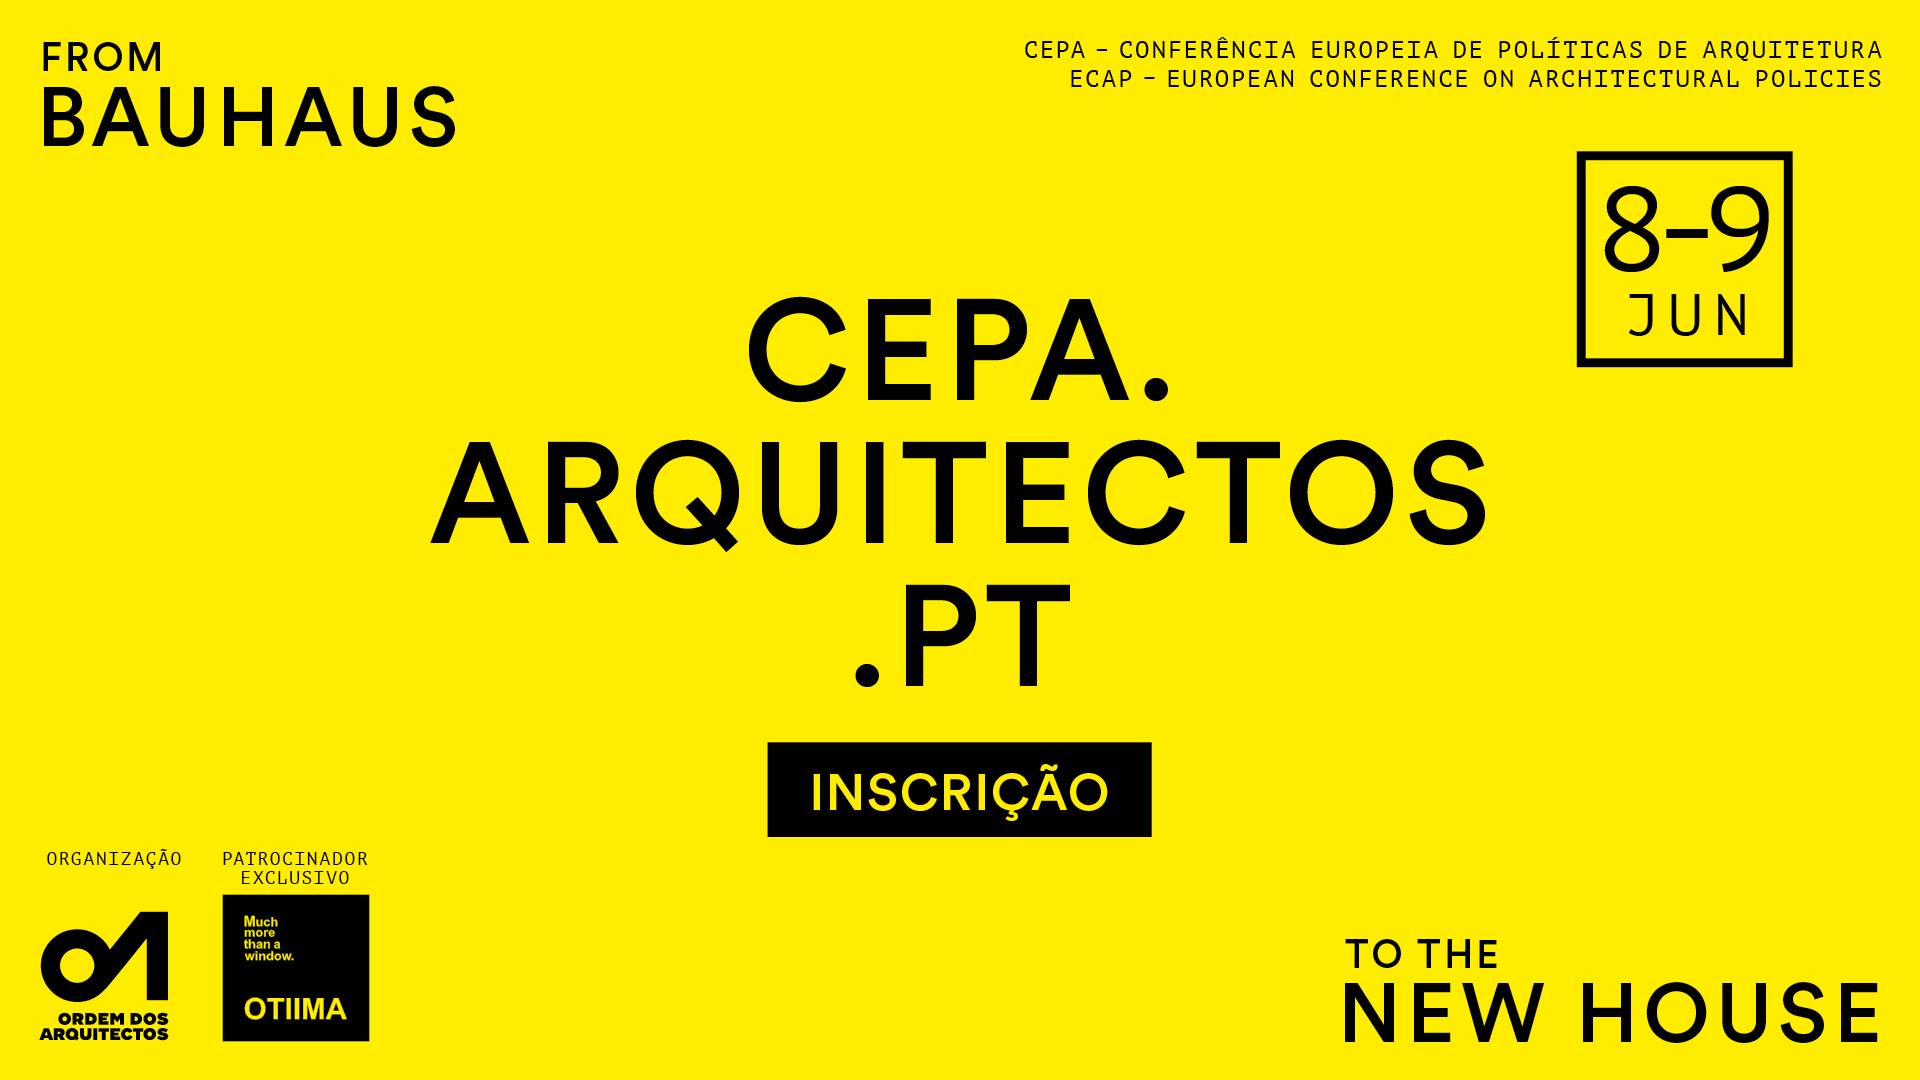 From Bauhaus to the New House (CEPA/ECAP)